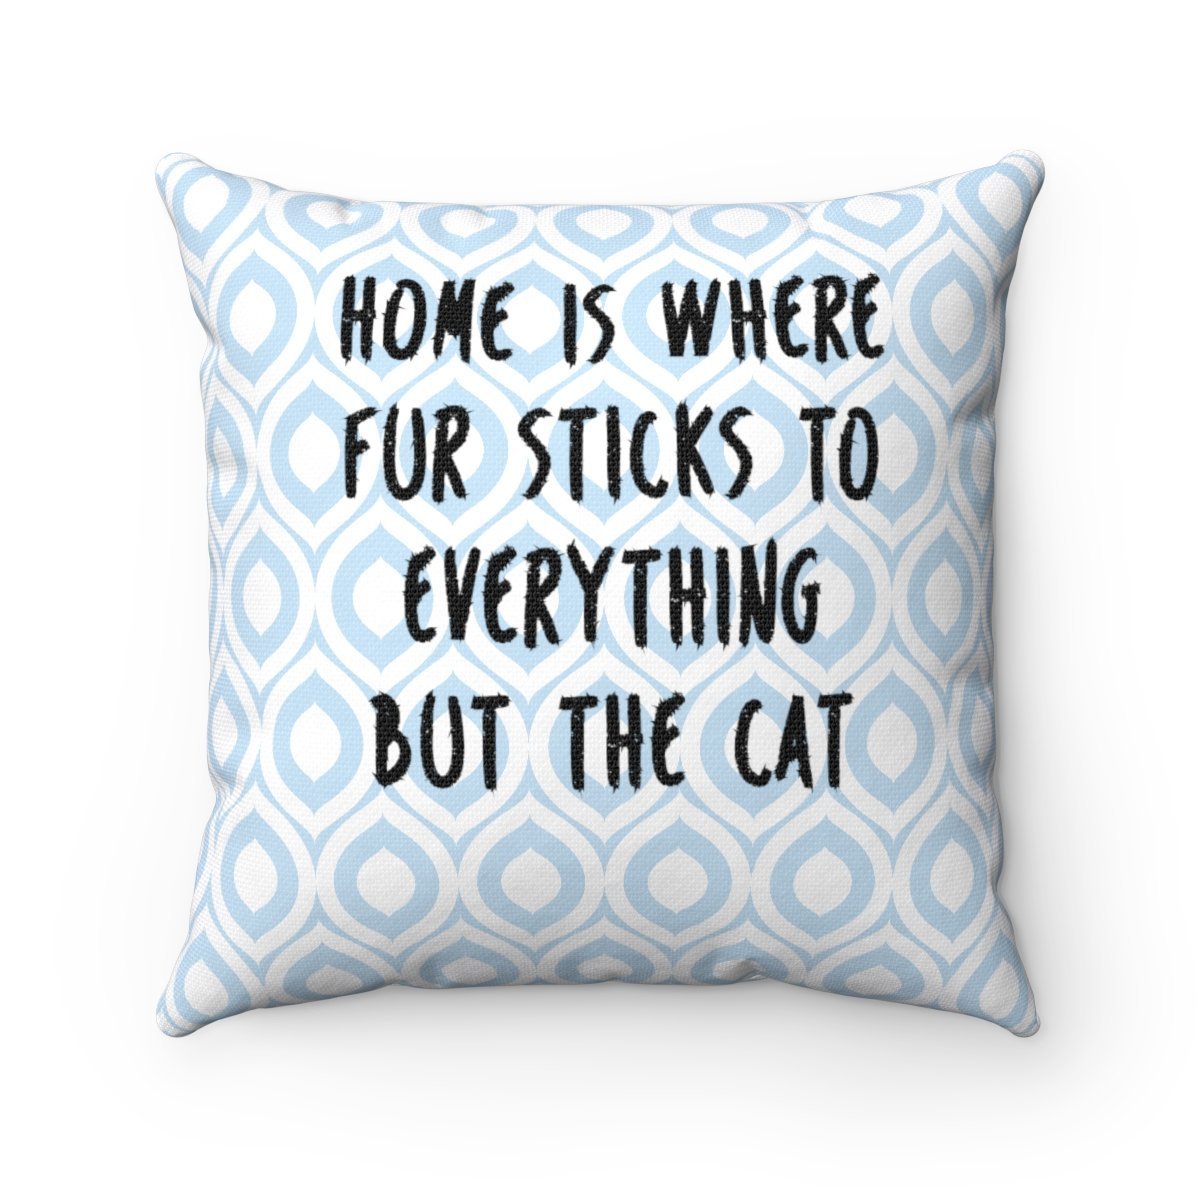 This decorative cat pillow has the text "Home is where fur sticks to everything but the cat" printed in black on a white and blue argyle pattern.